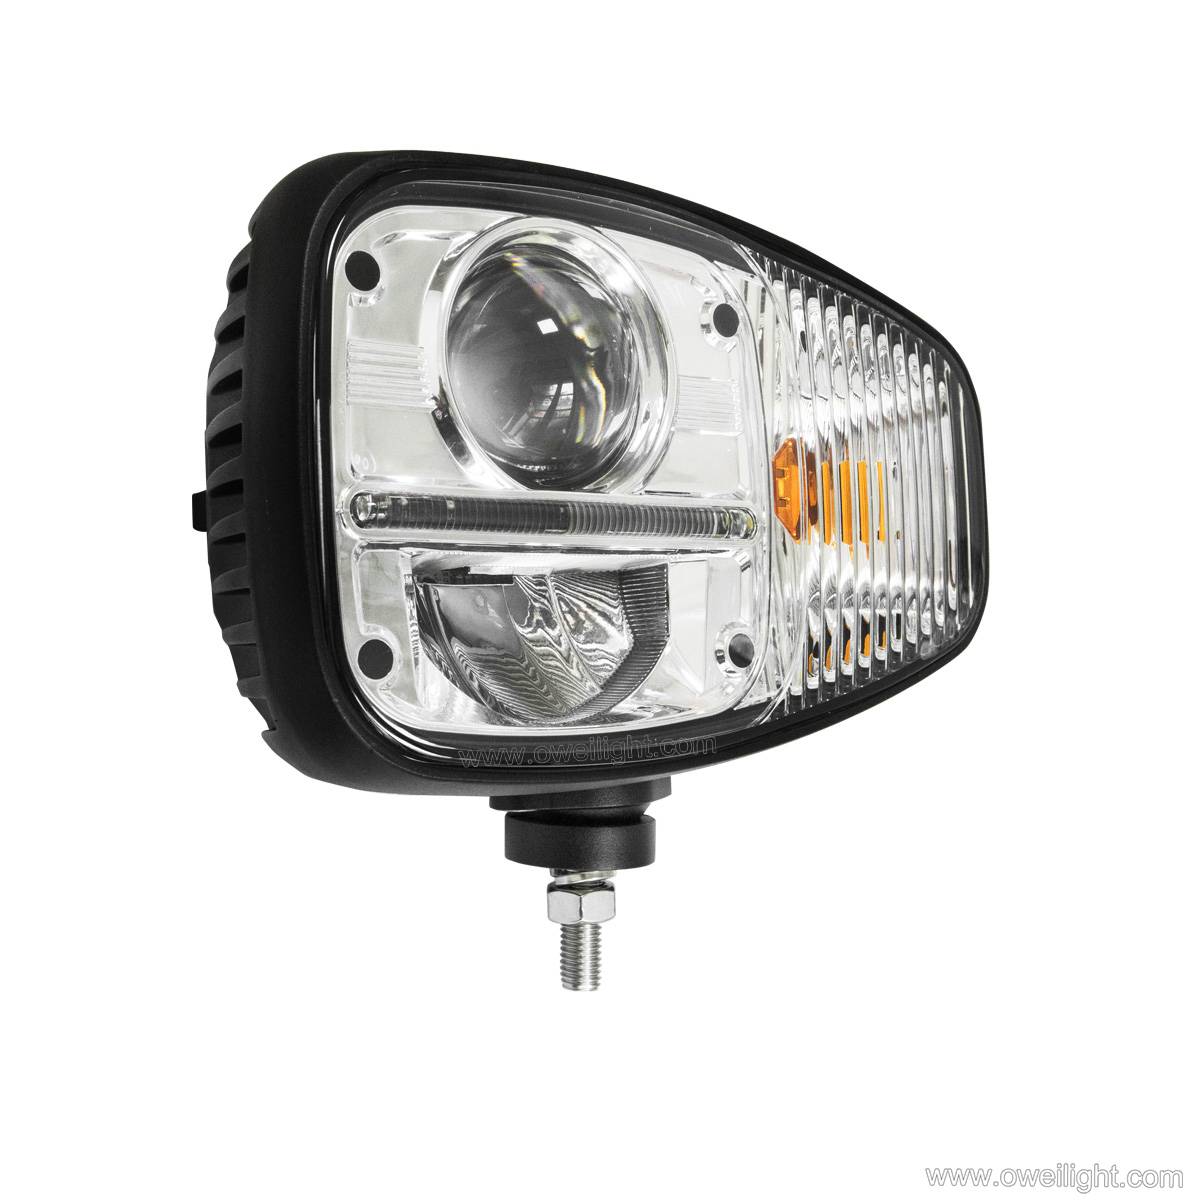 Agricultural Light - OW-9102-82W